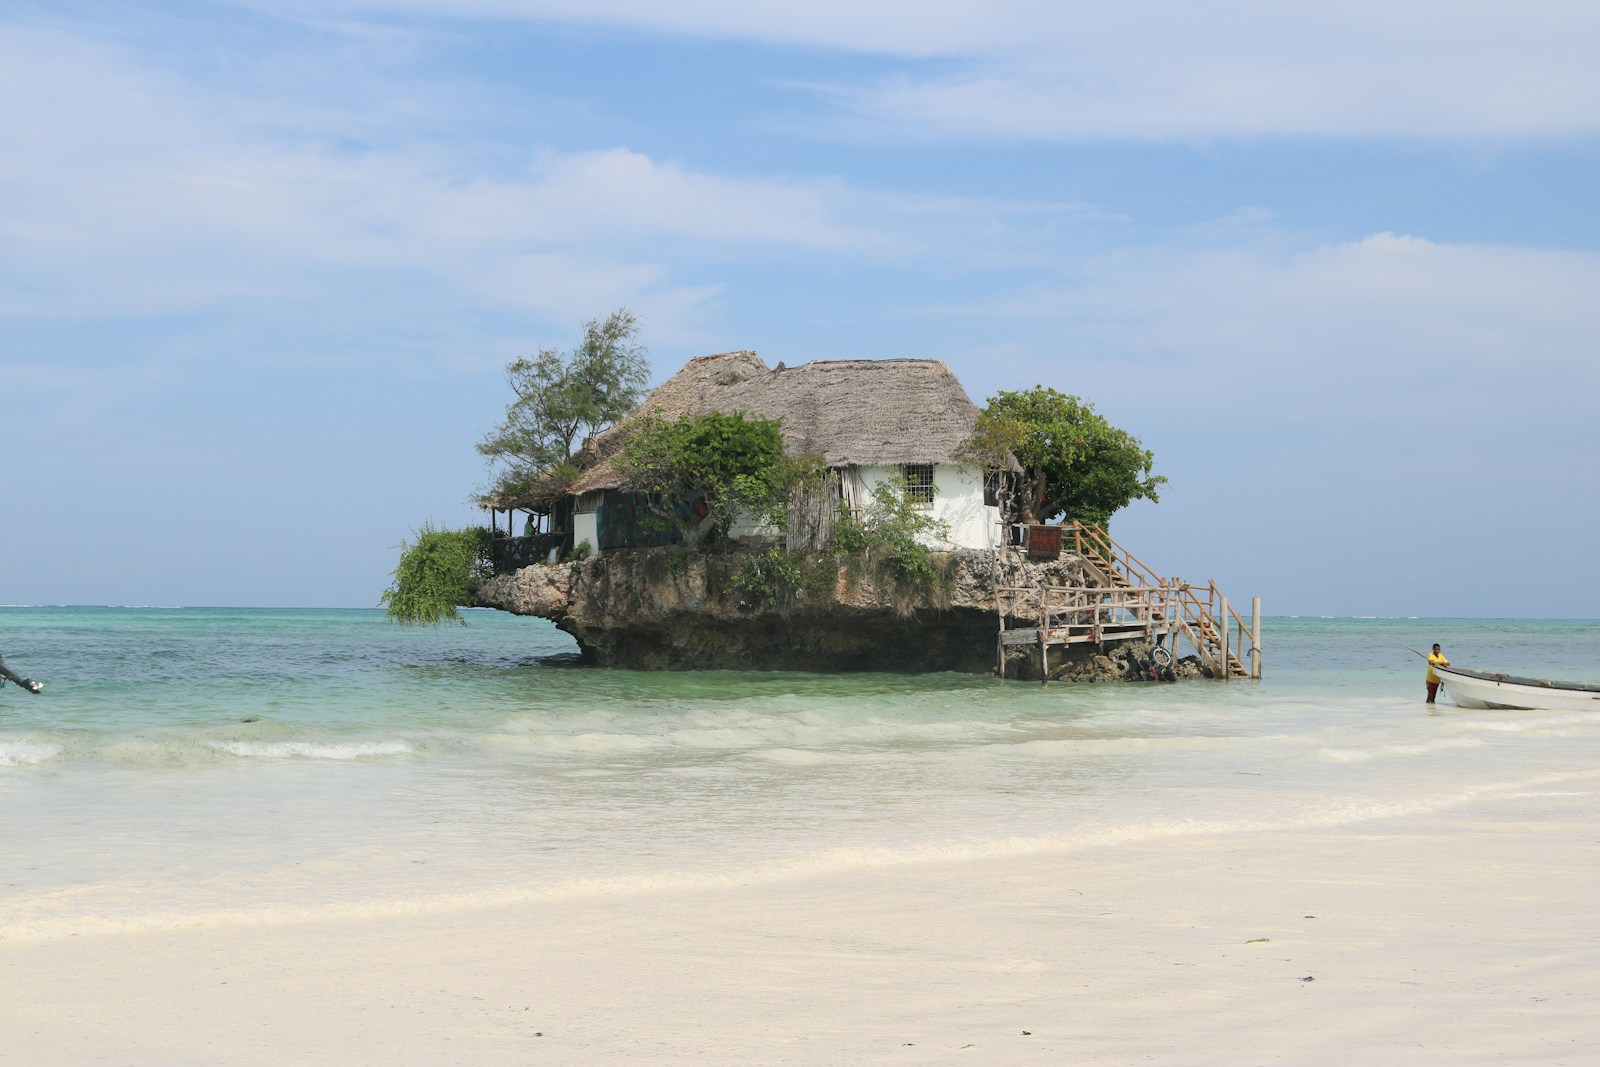 a house on an island in the middle of the ocean